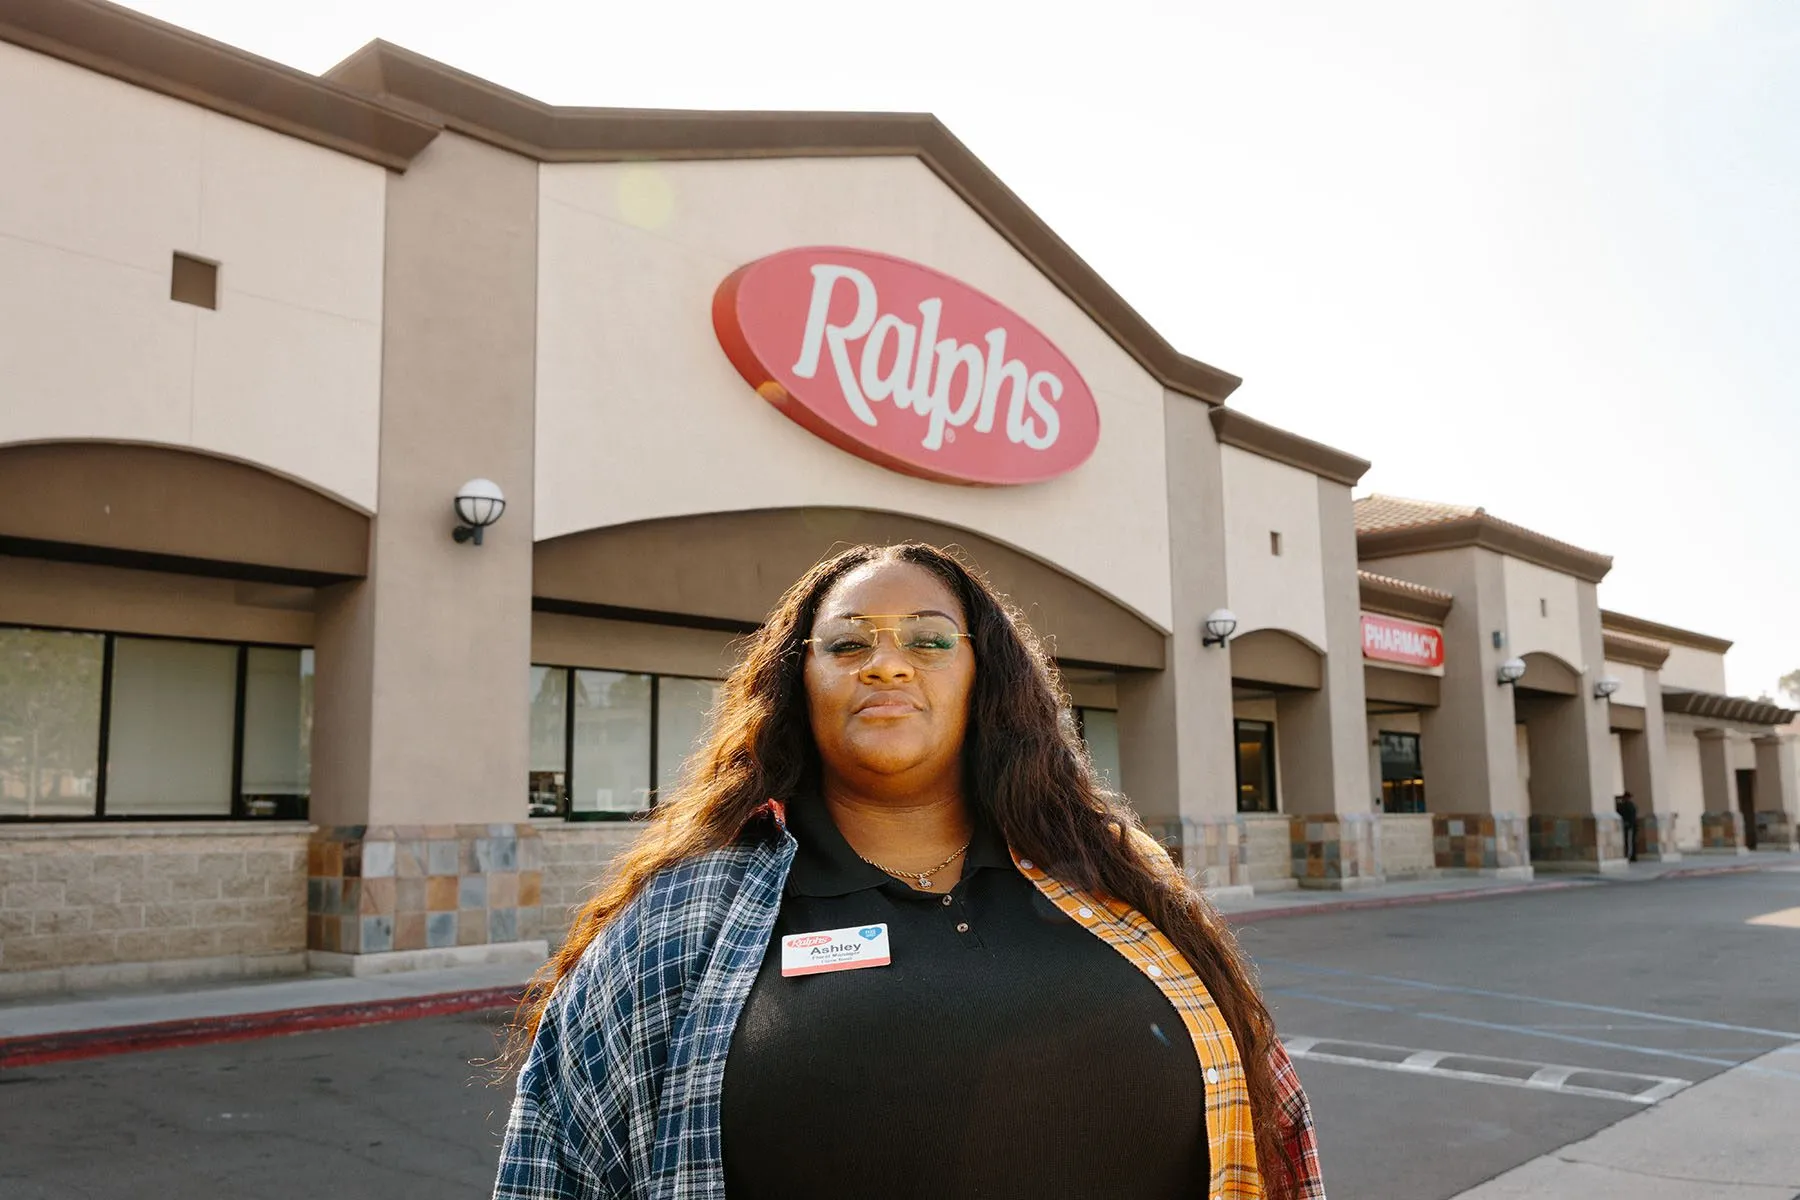 Ashley Manning poses for a portrait in front of the Ralphs grocery story where she works.